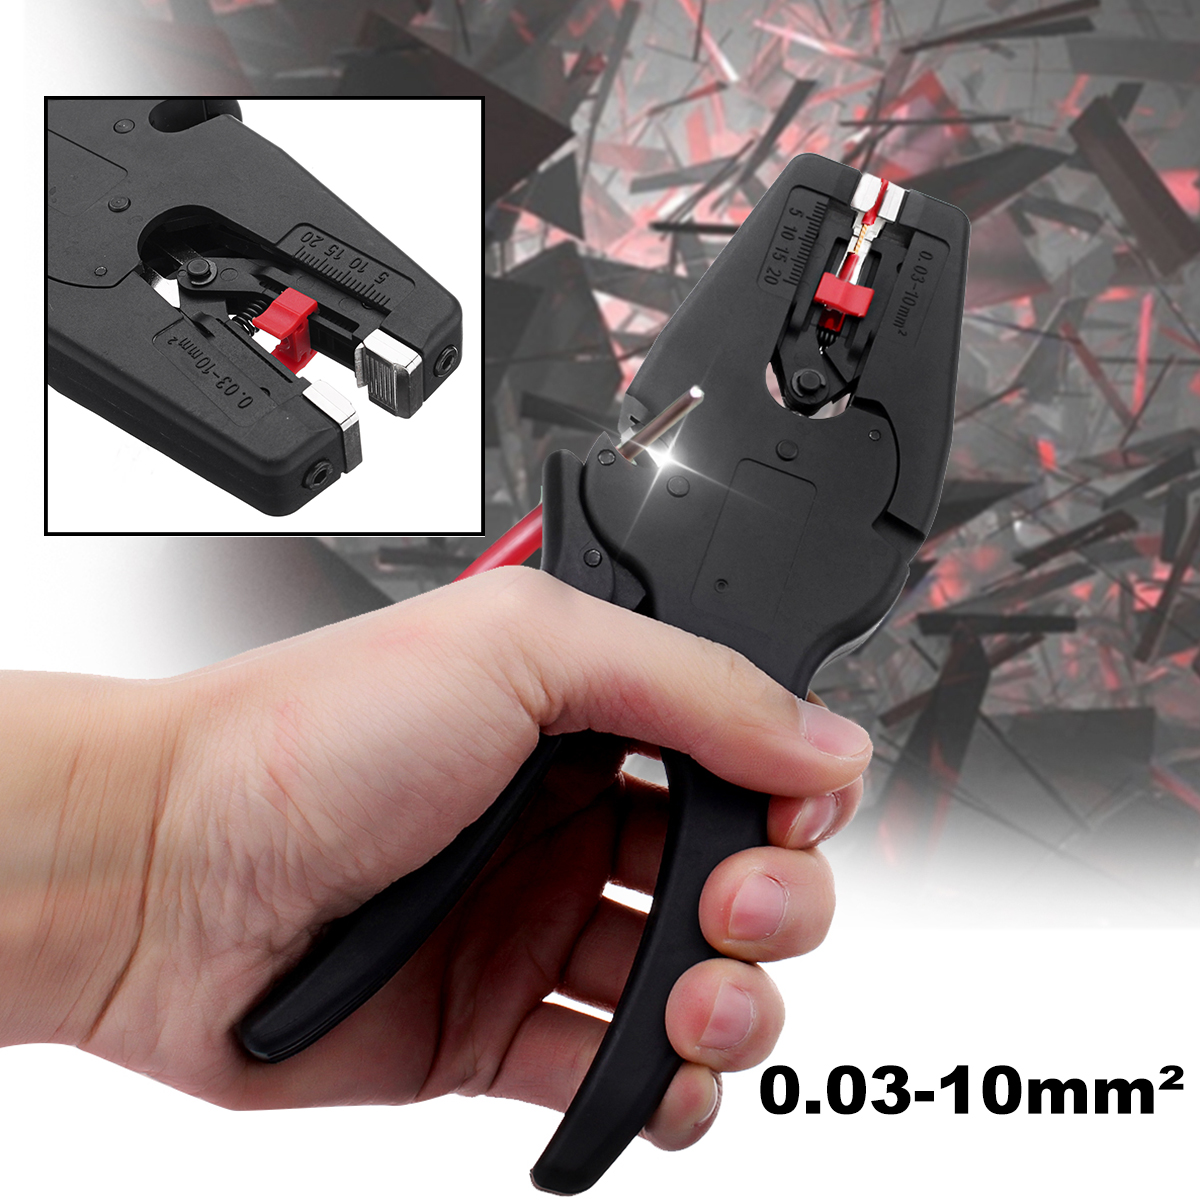 Multifunctional-Adjustable-Electric-Cable-Wire-Crimper-Stripper-Stripping-Plier-003-10mmsup2-1315989-2